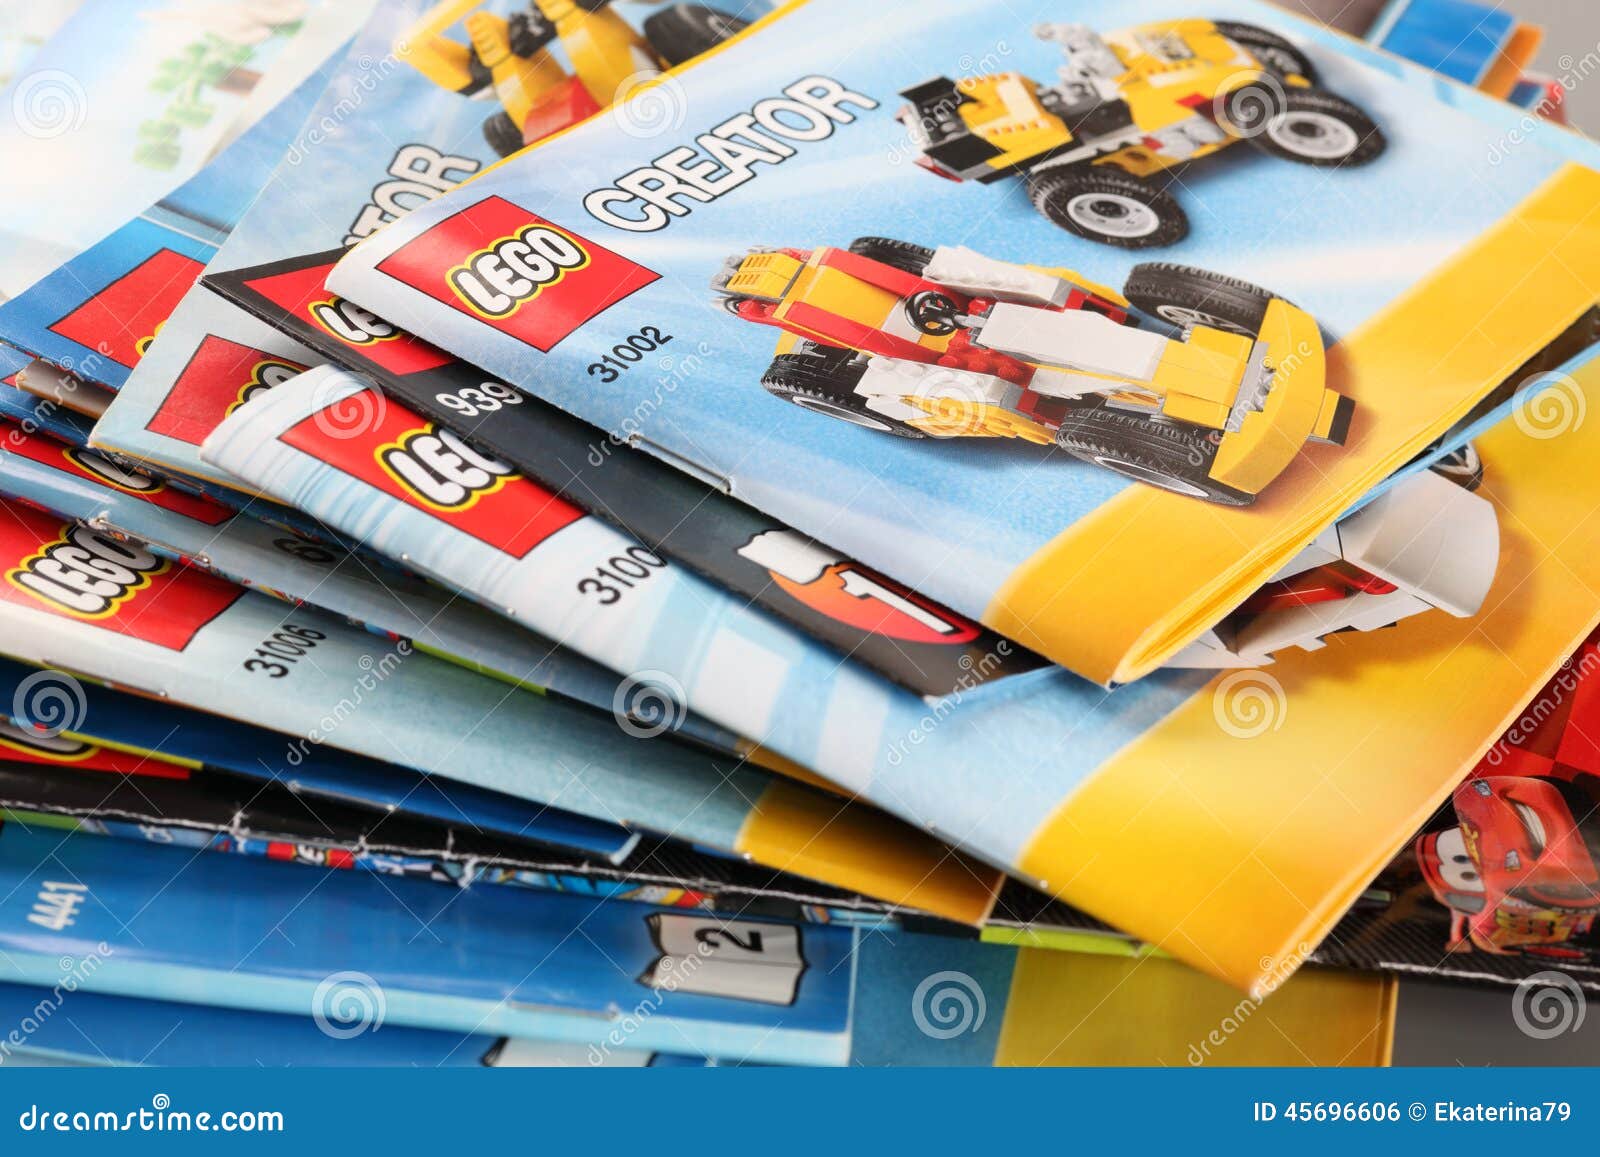 Lego Instructions Photos - Free & Royalty-Free Stock Photos from Dreamstime